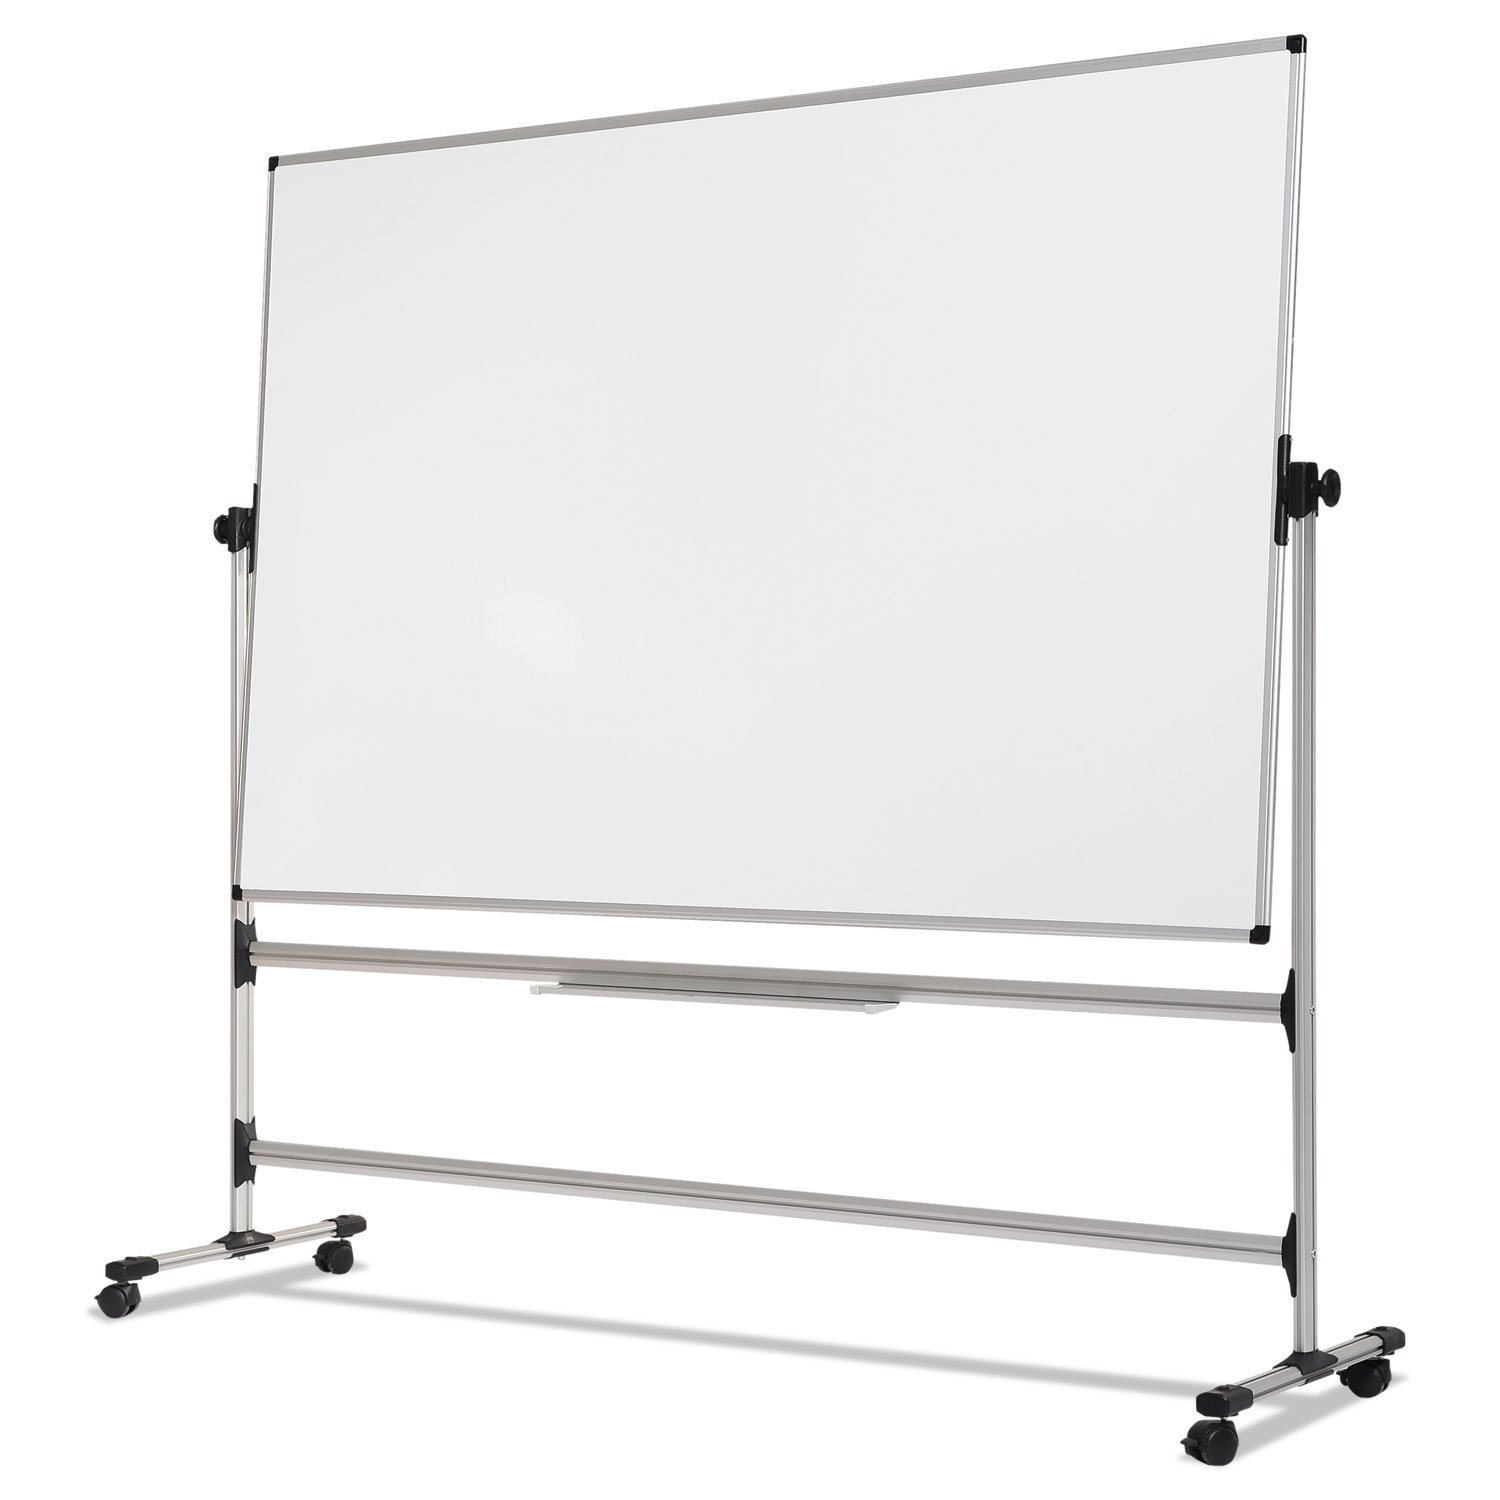  MasterVision RQR0521 Earth Silver Easy Clean Revolver Dry Erase Board,48x70, White, Steel Frame (BVCRQR0521) 